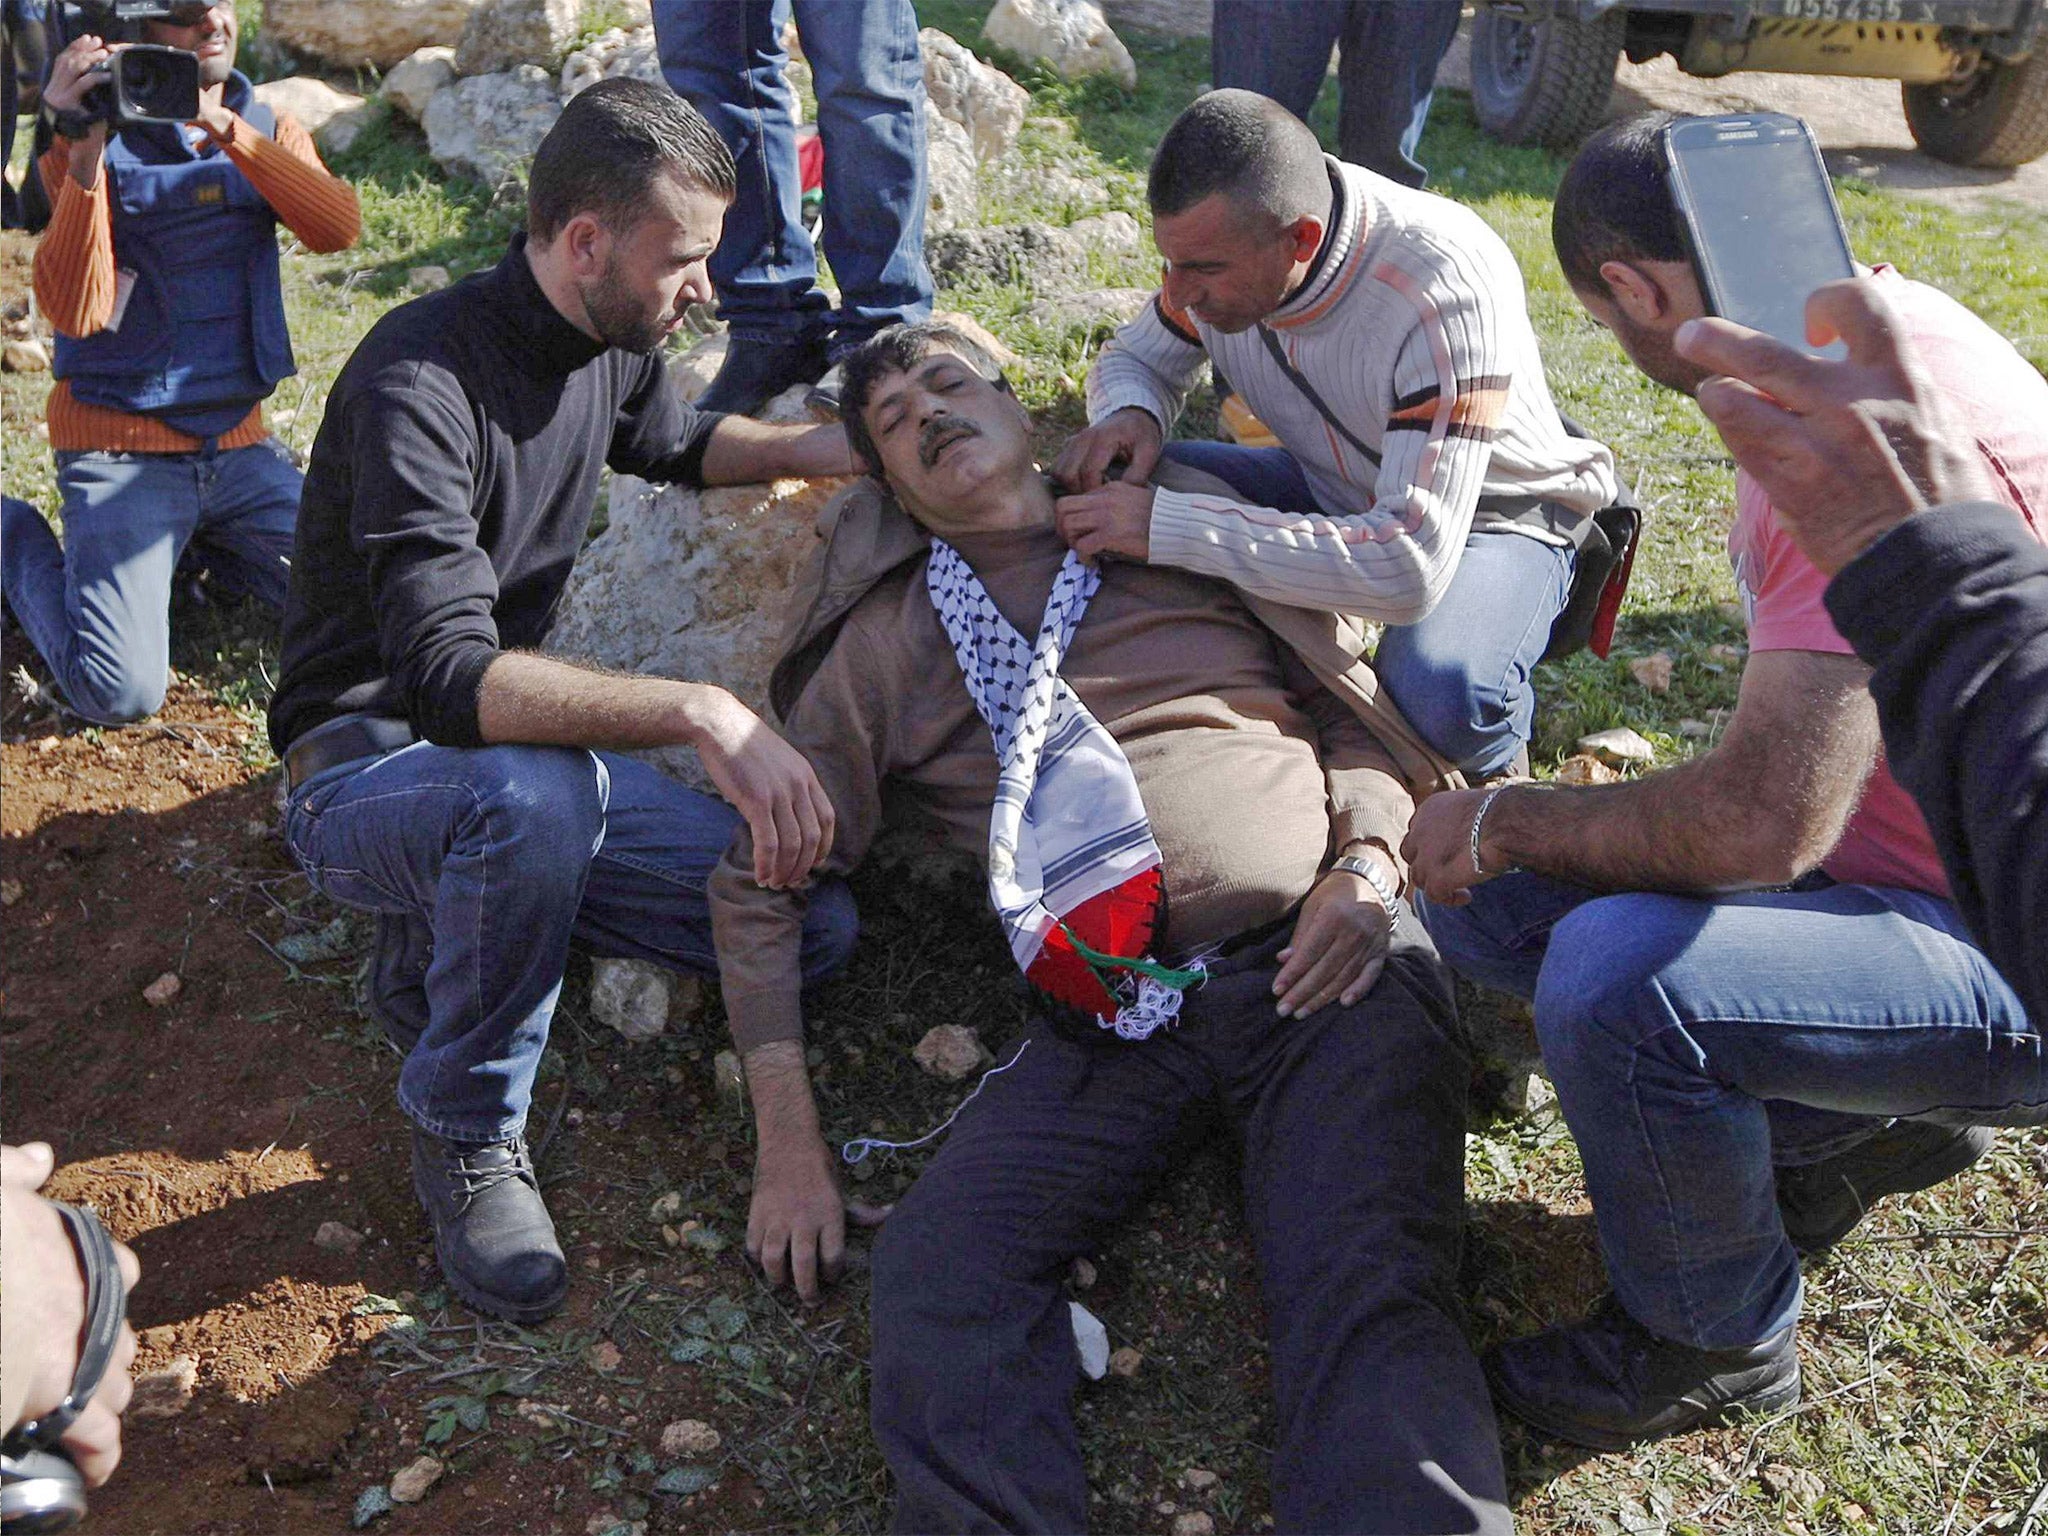 Ziad Abu Ein lying injured after he was in an altercation with Israeli troops